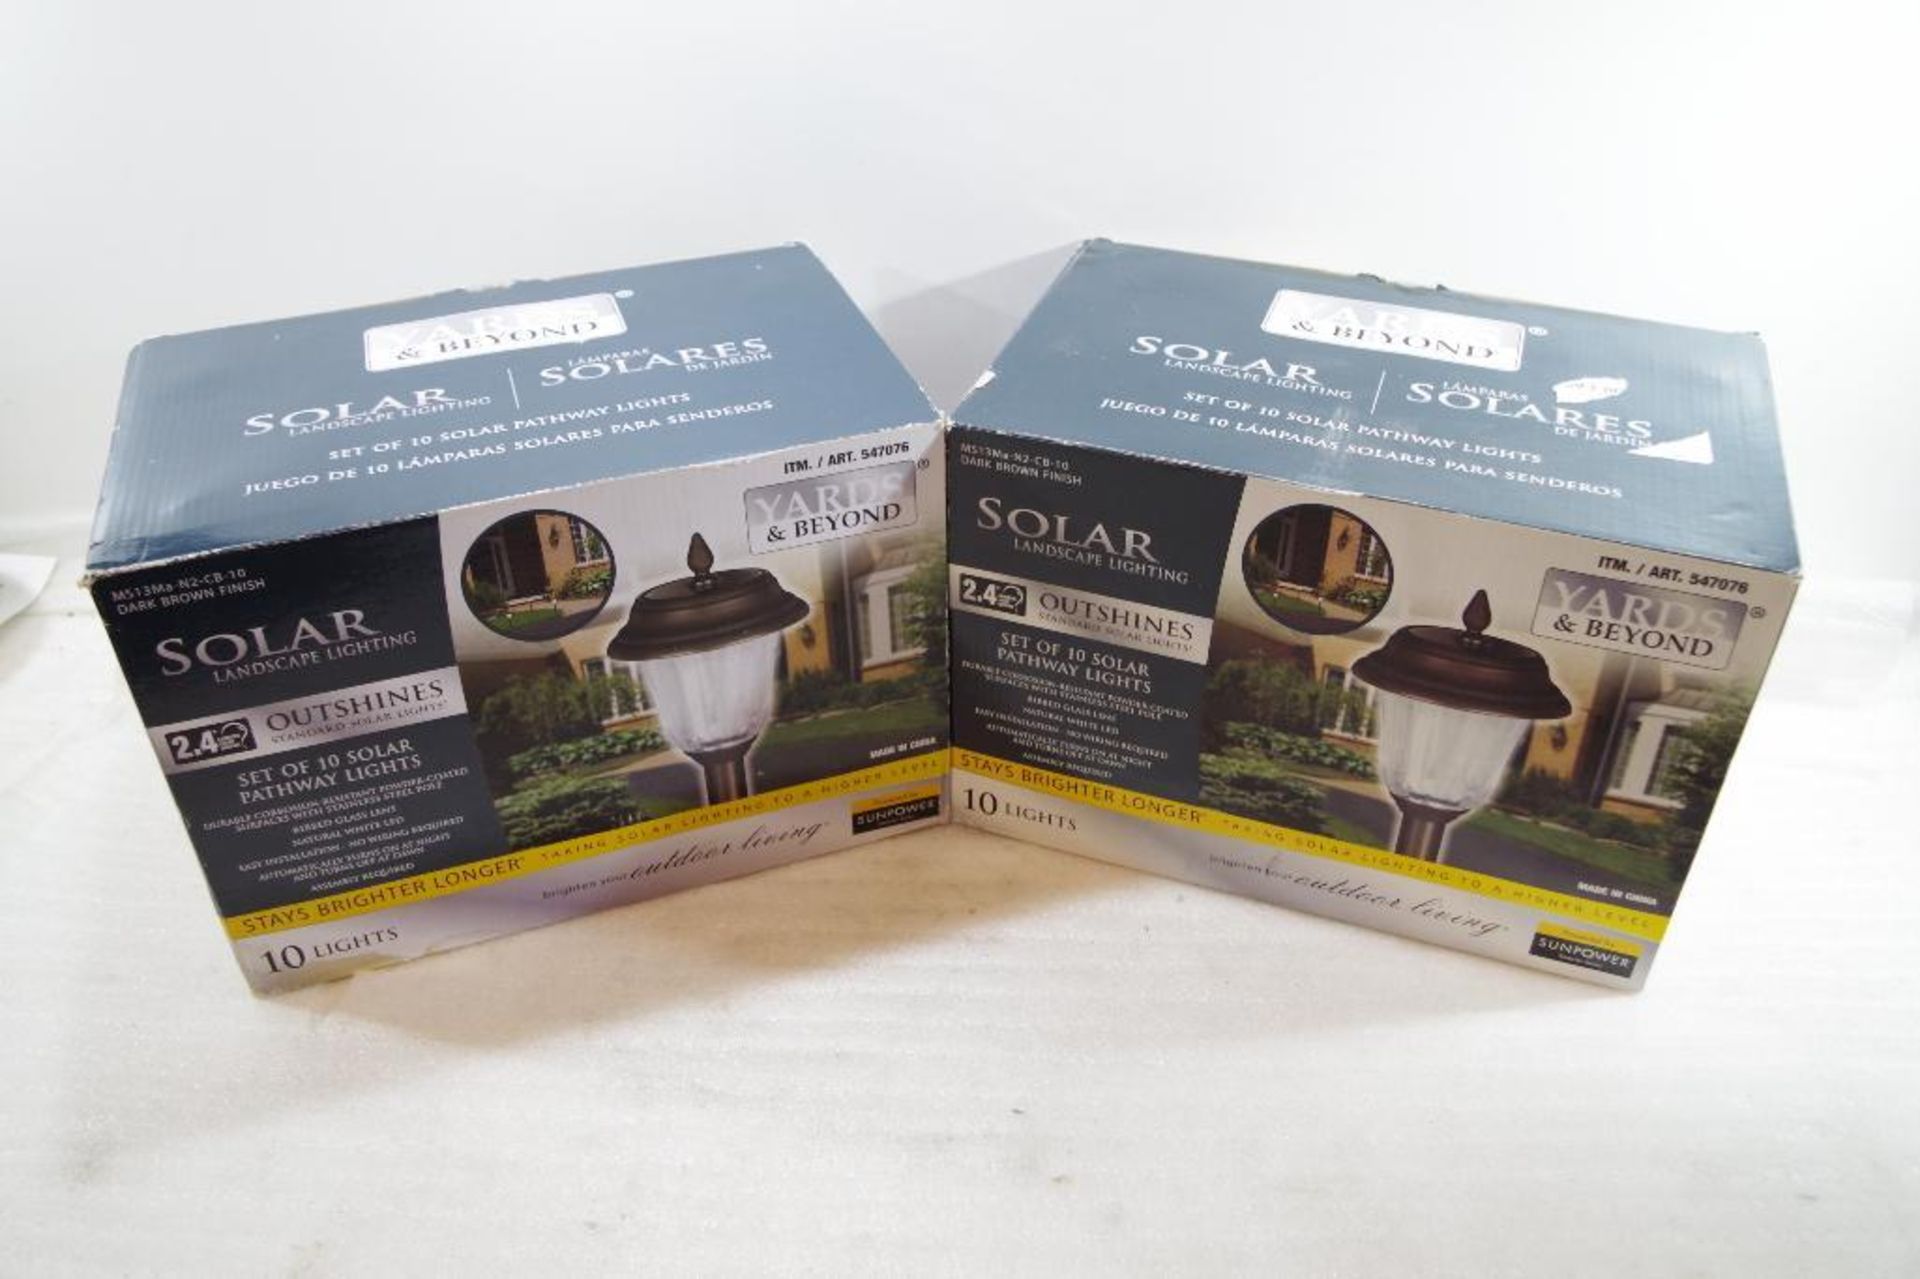 [2] YARDS & BEYOND Solar Pathway Light Sets (2 boxes of 10 lights each) - Image 3 of 3